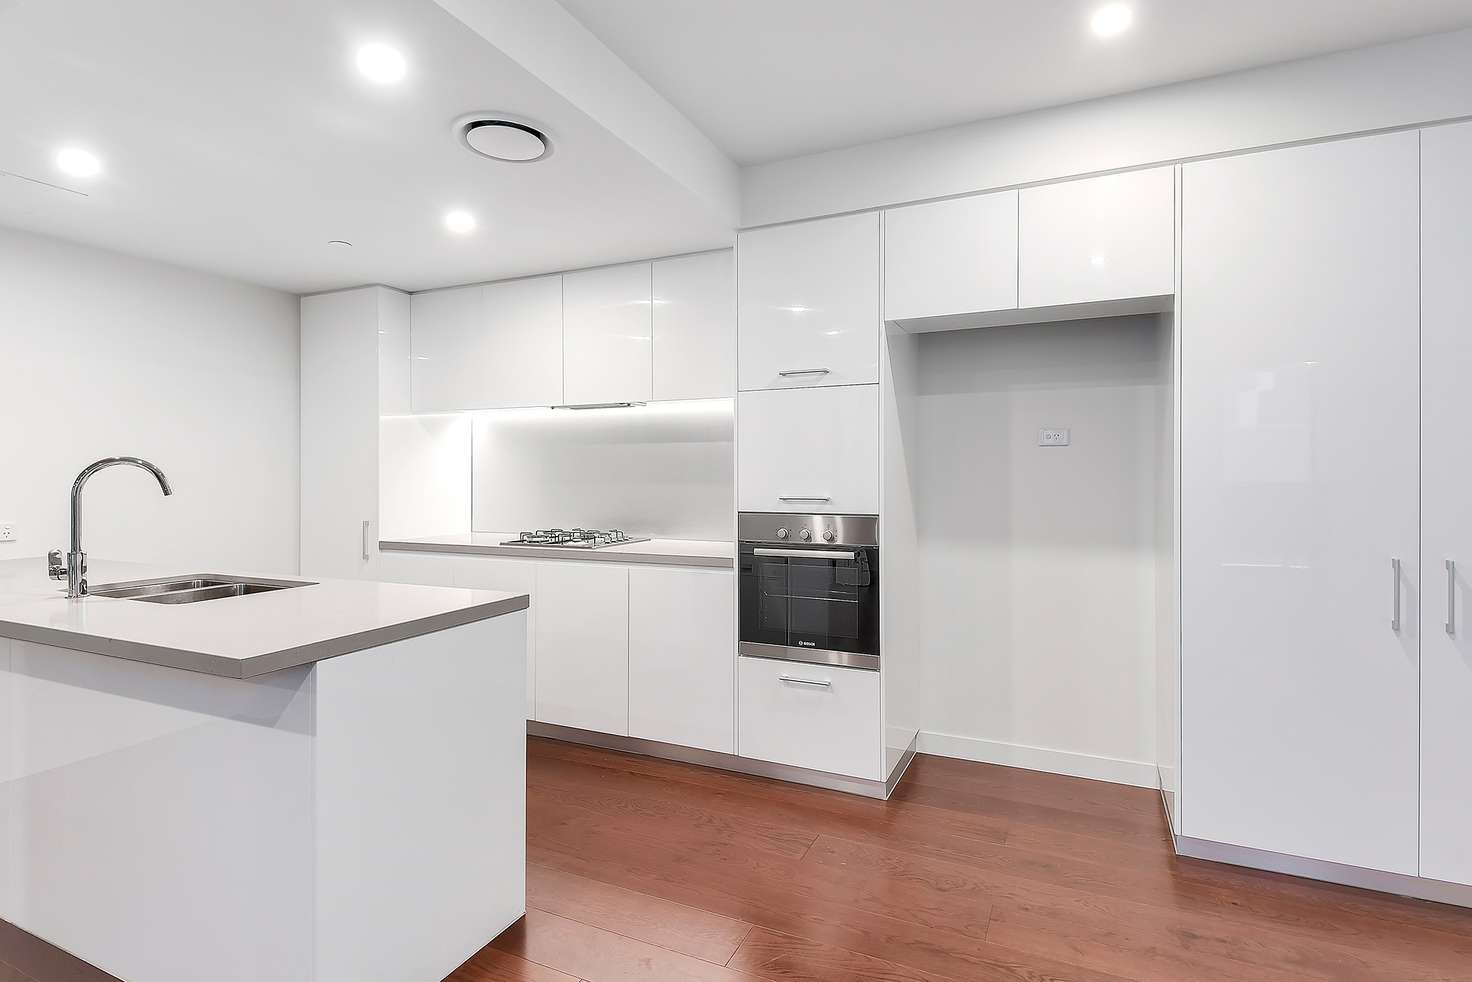 Main view of Homely apartment listing, 20411/39 Cordelia Street, South Brisbane QLD 4101